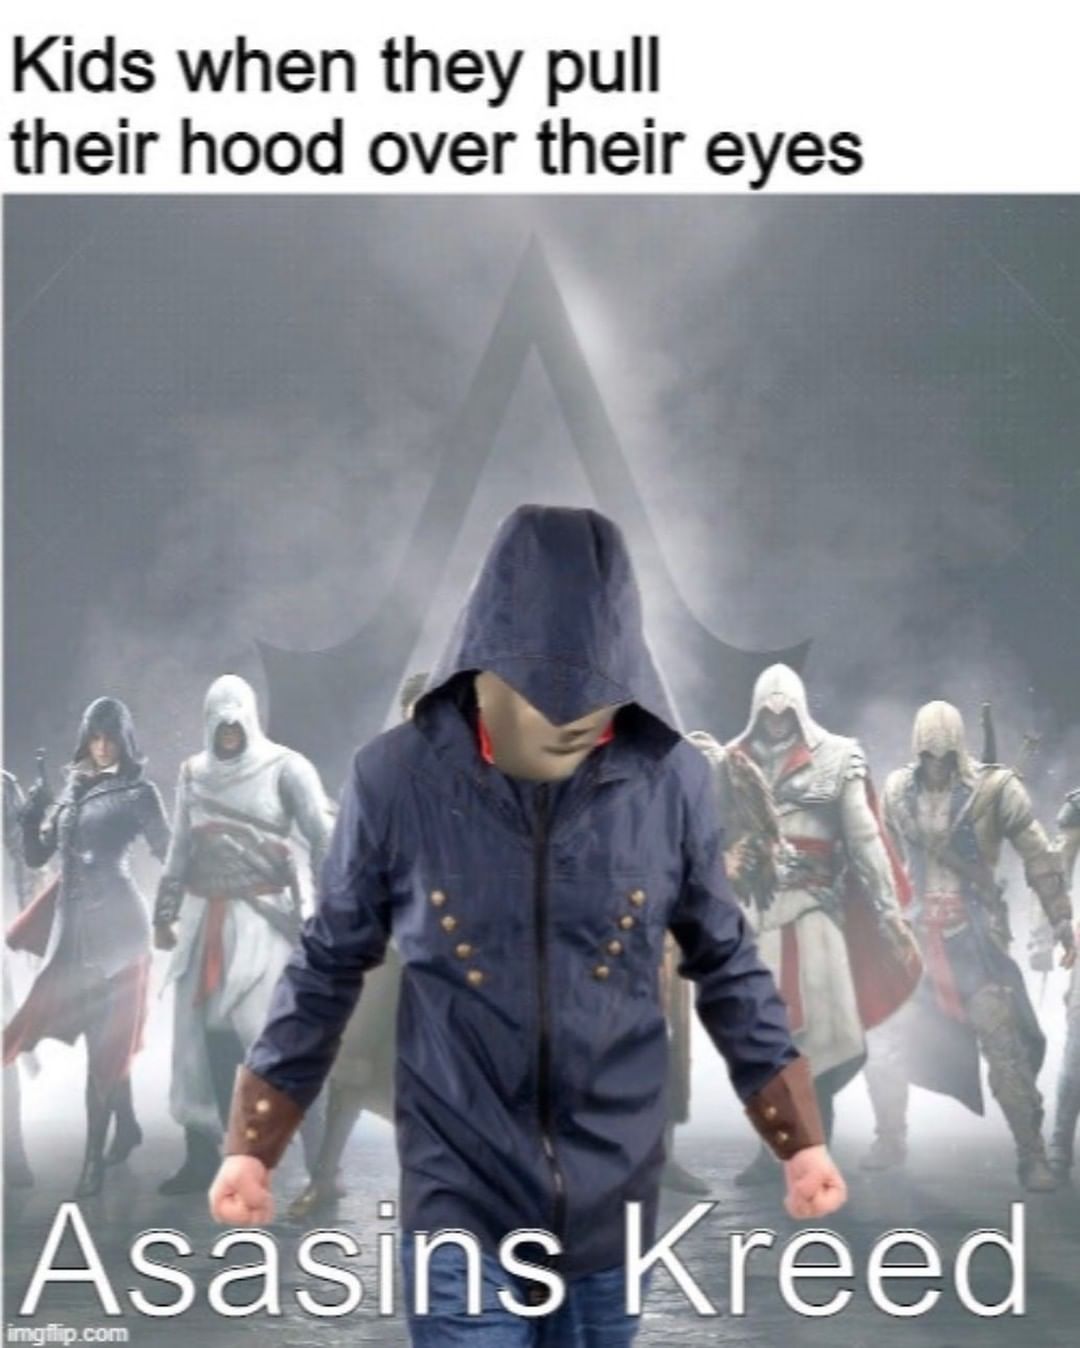 Kids when they pull their hood over their eyes.